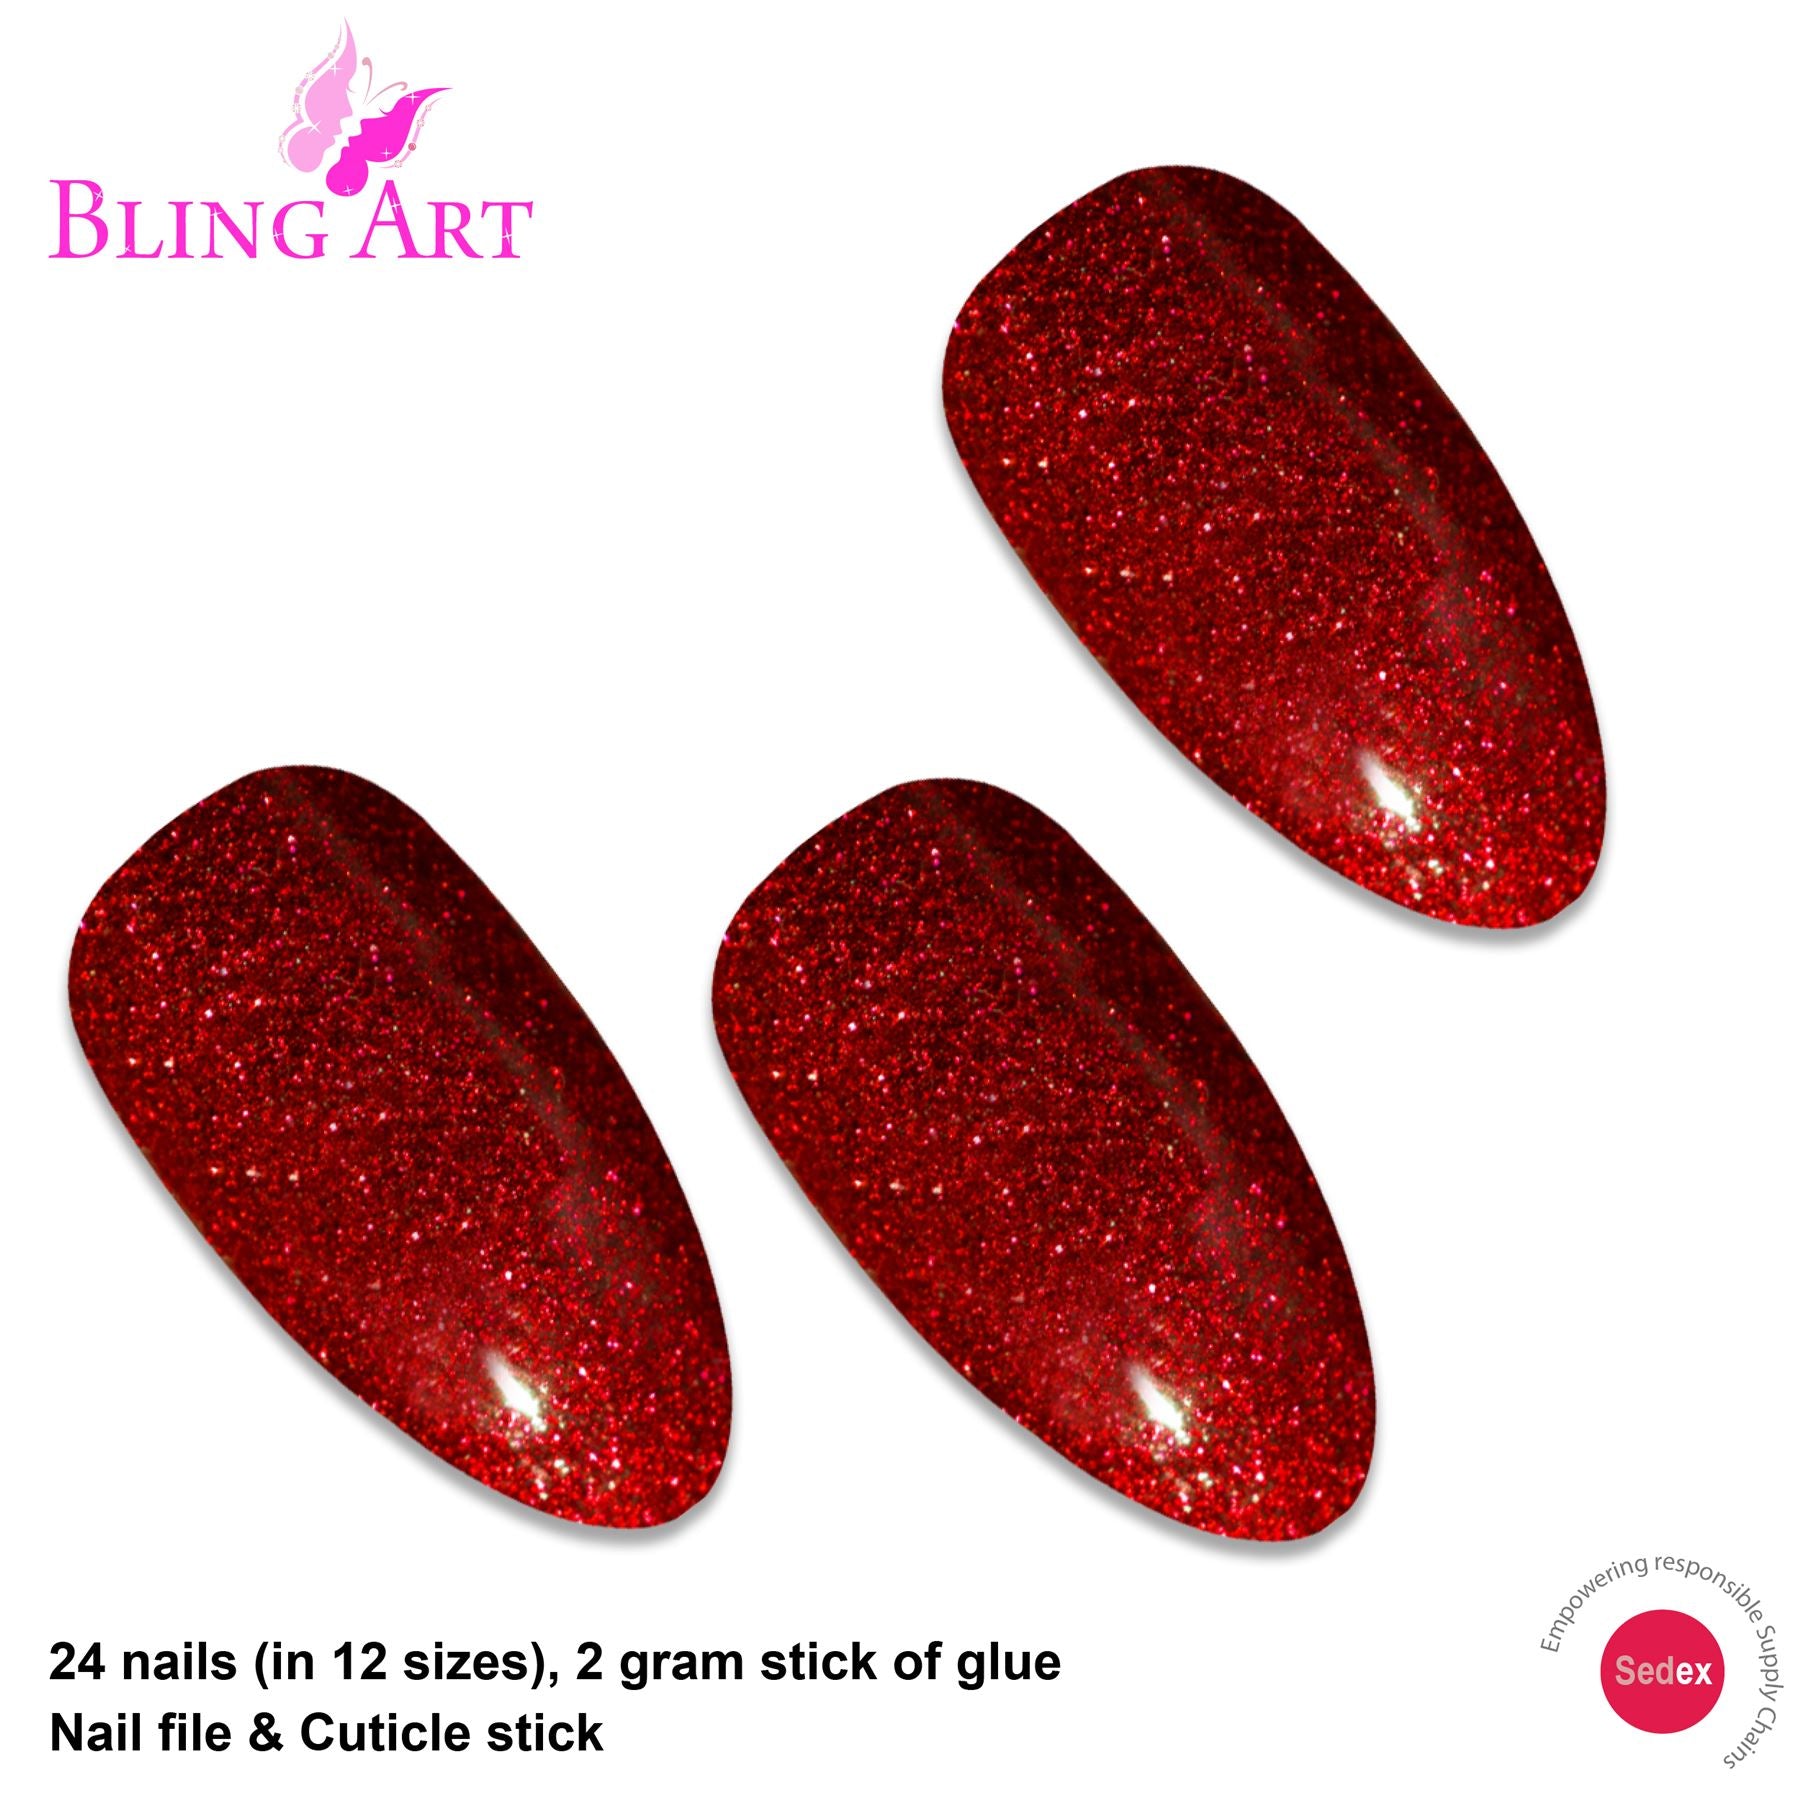 False Nails Bling Art Red Gel Almond Stiletto Long Fake Acrylic Tips with Glue